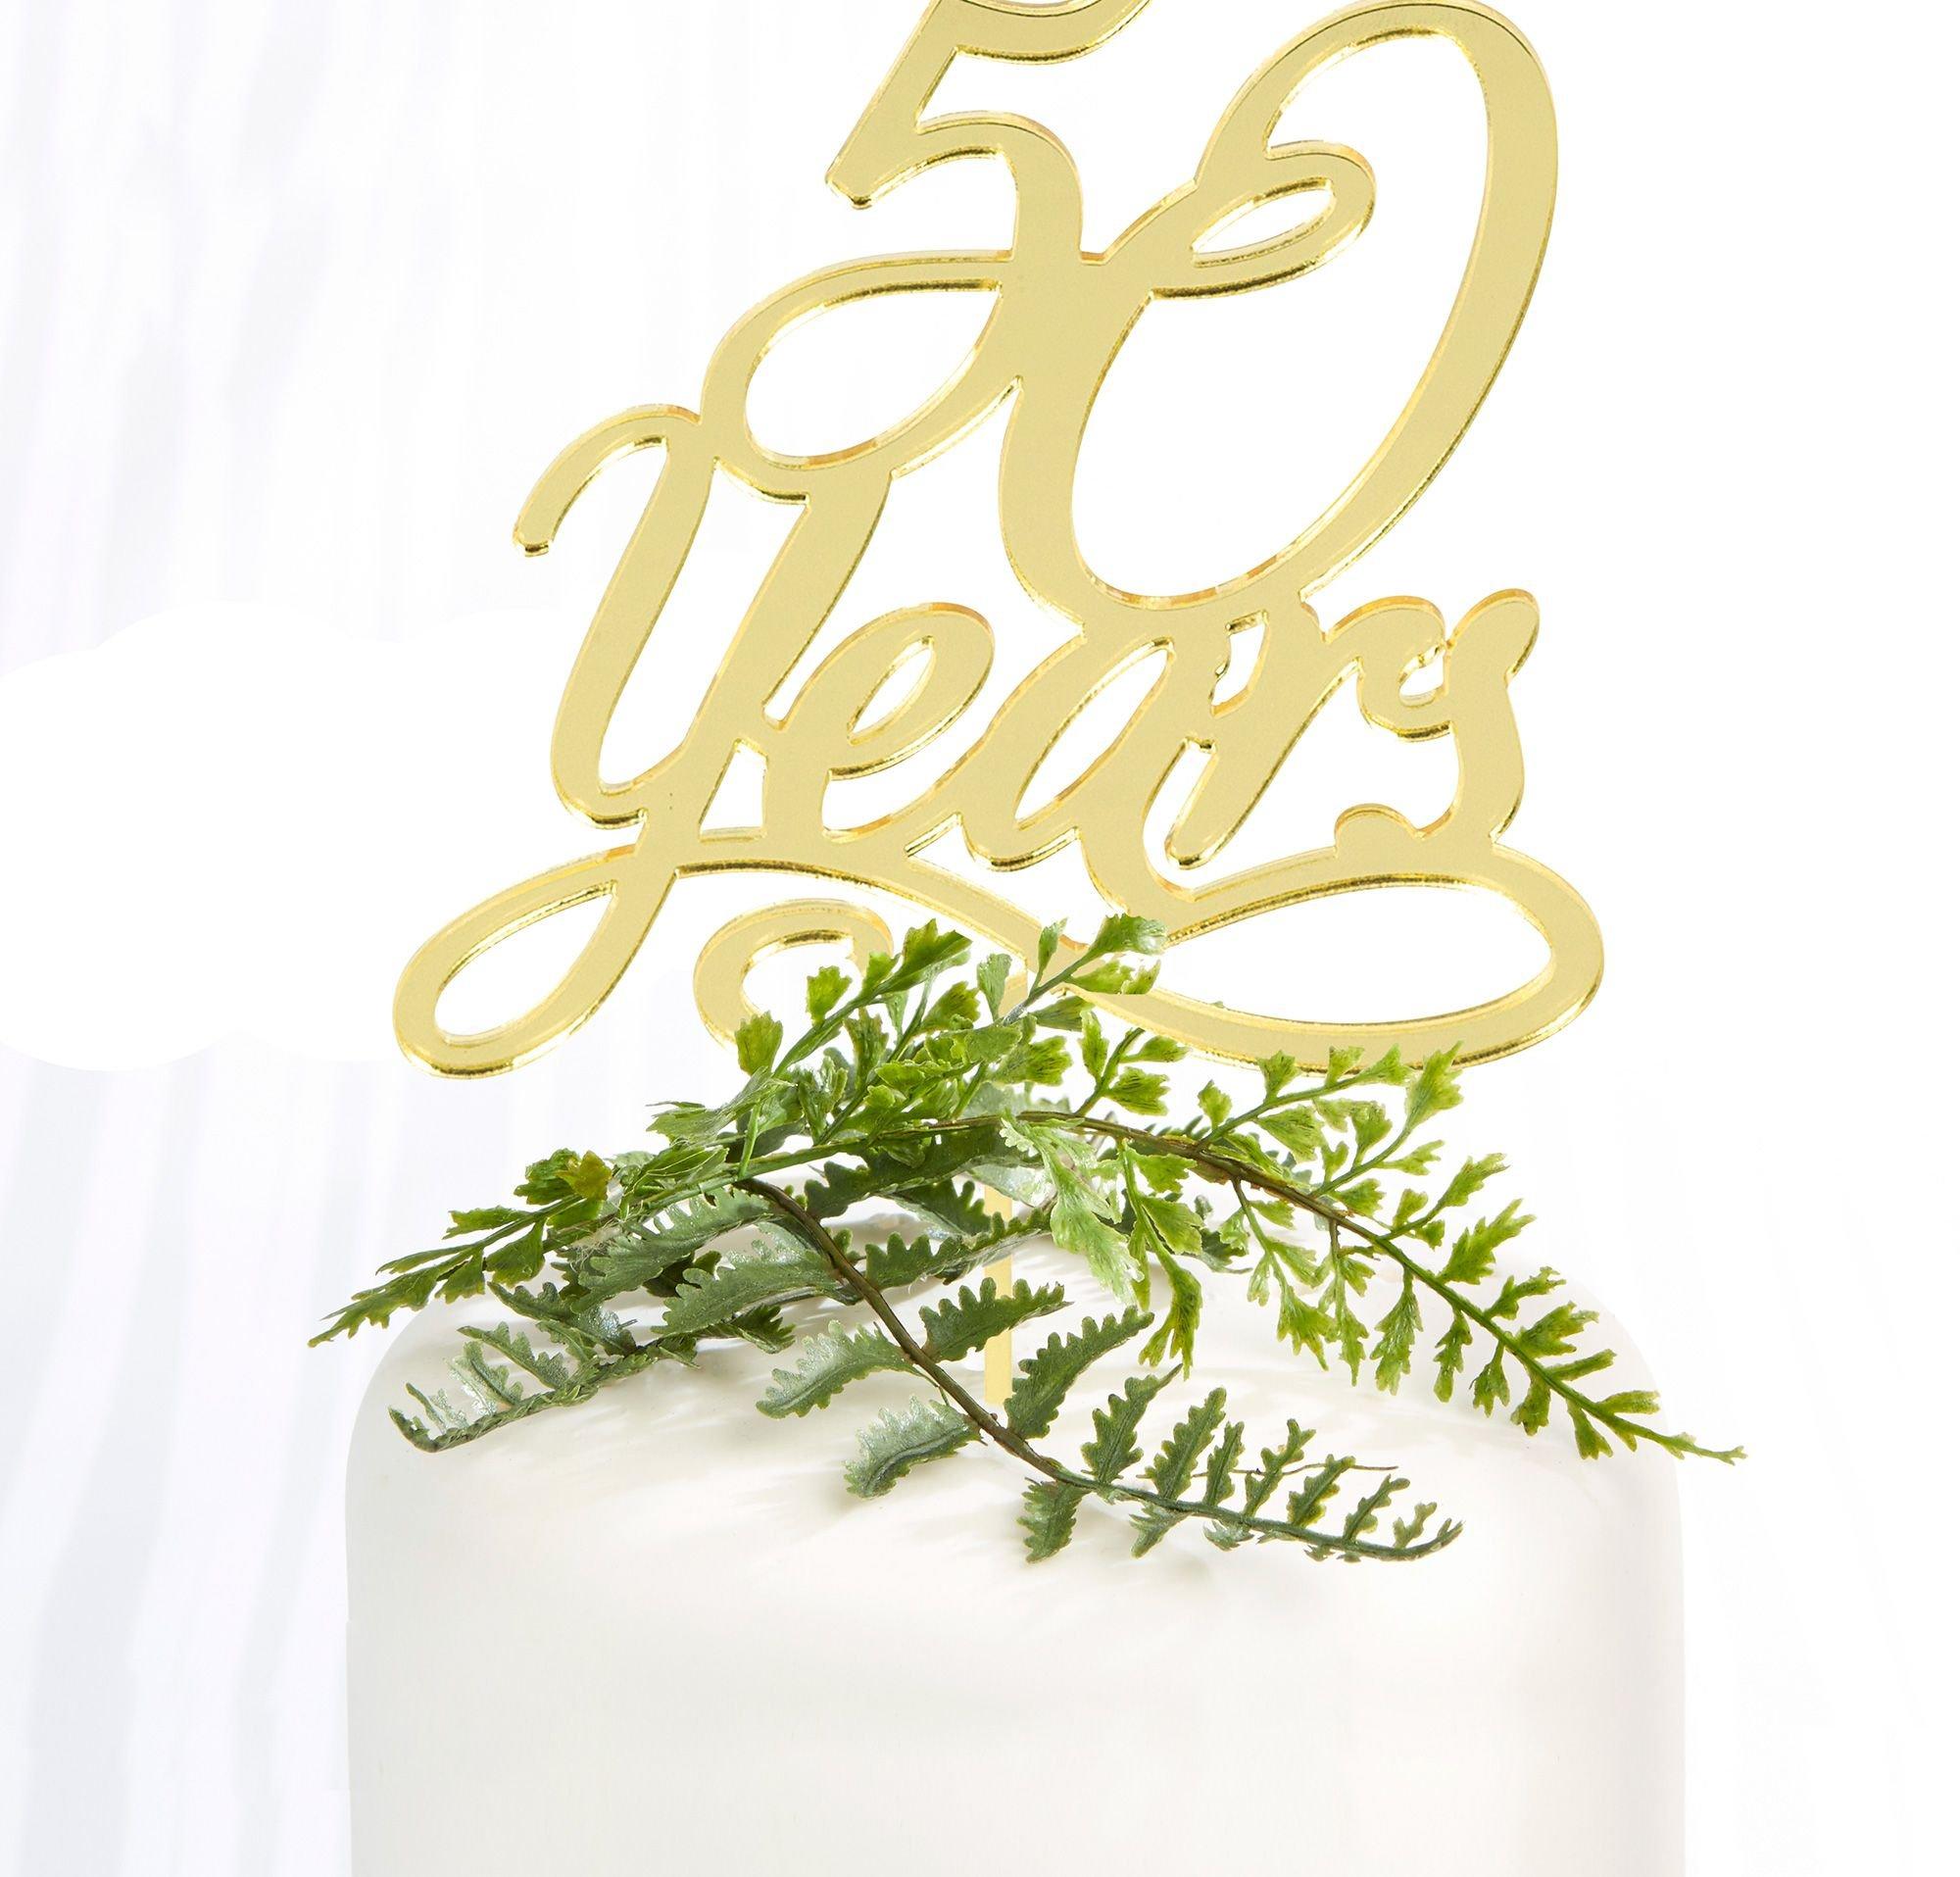 Gold 50th Anniversary Cake Topper 4 1/4in x 6 3/4in